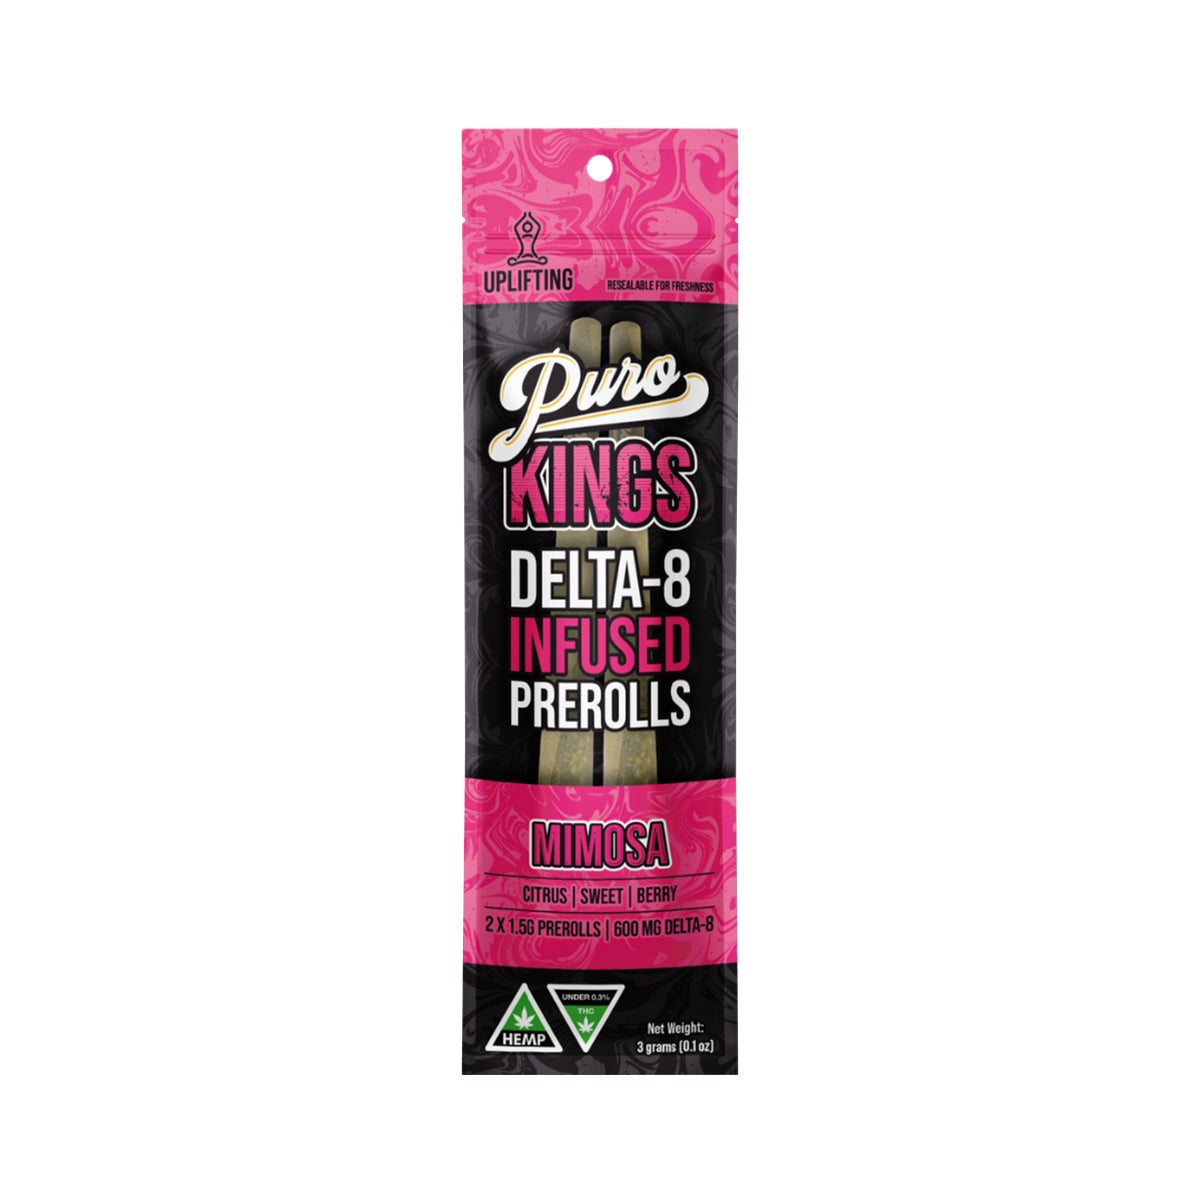 Puro Kings Delta-8 Infused Pre-Rolls 2pc 3g Best Price